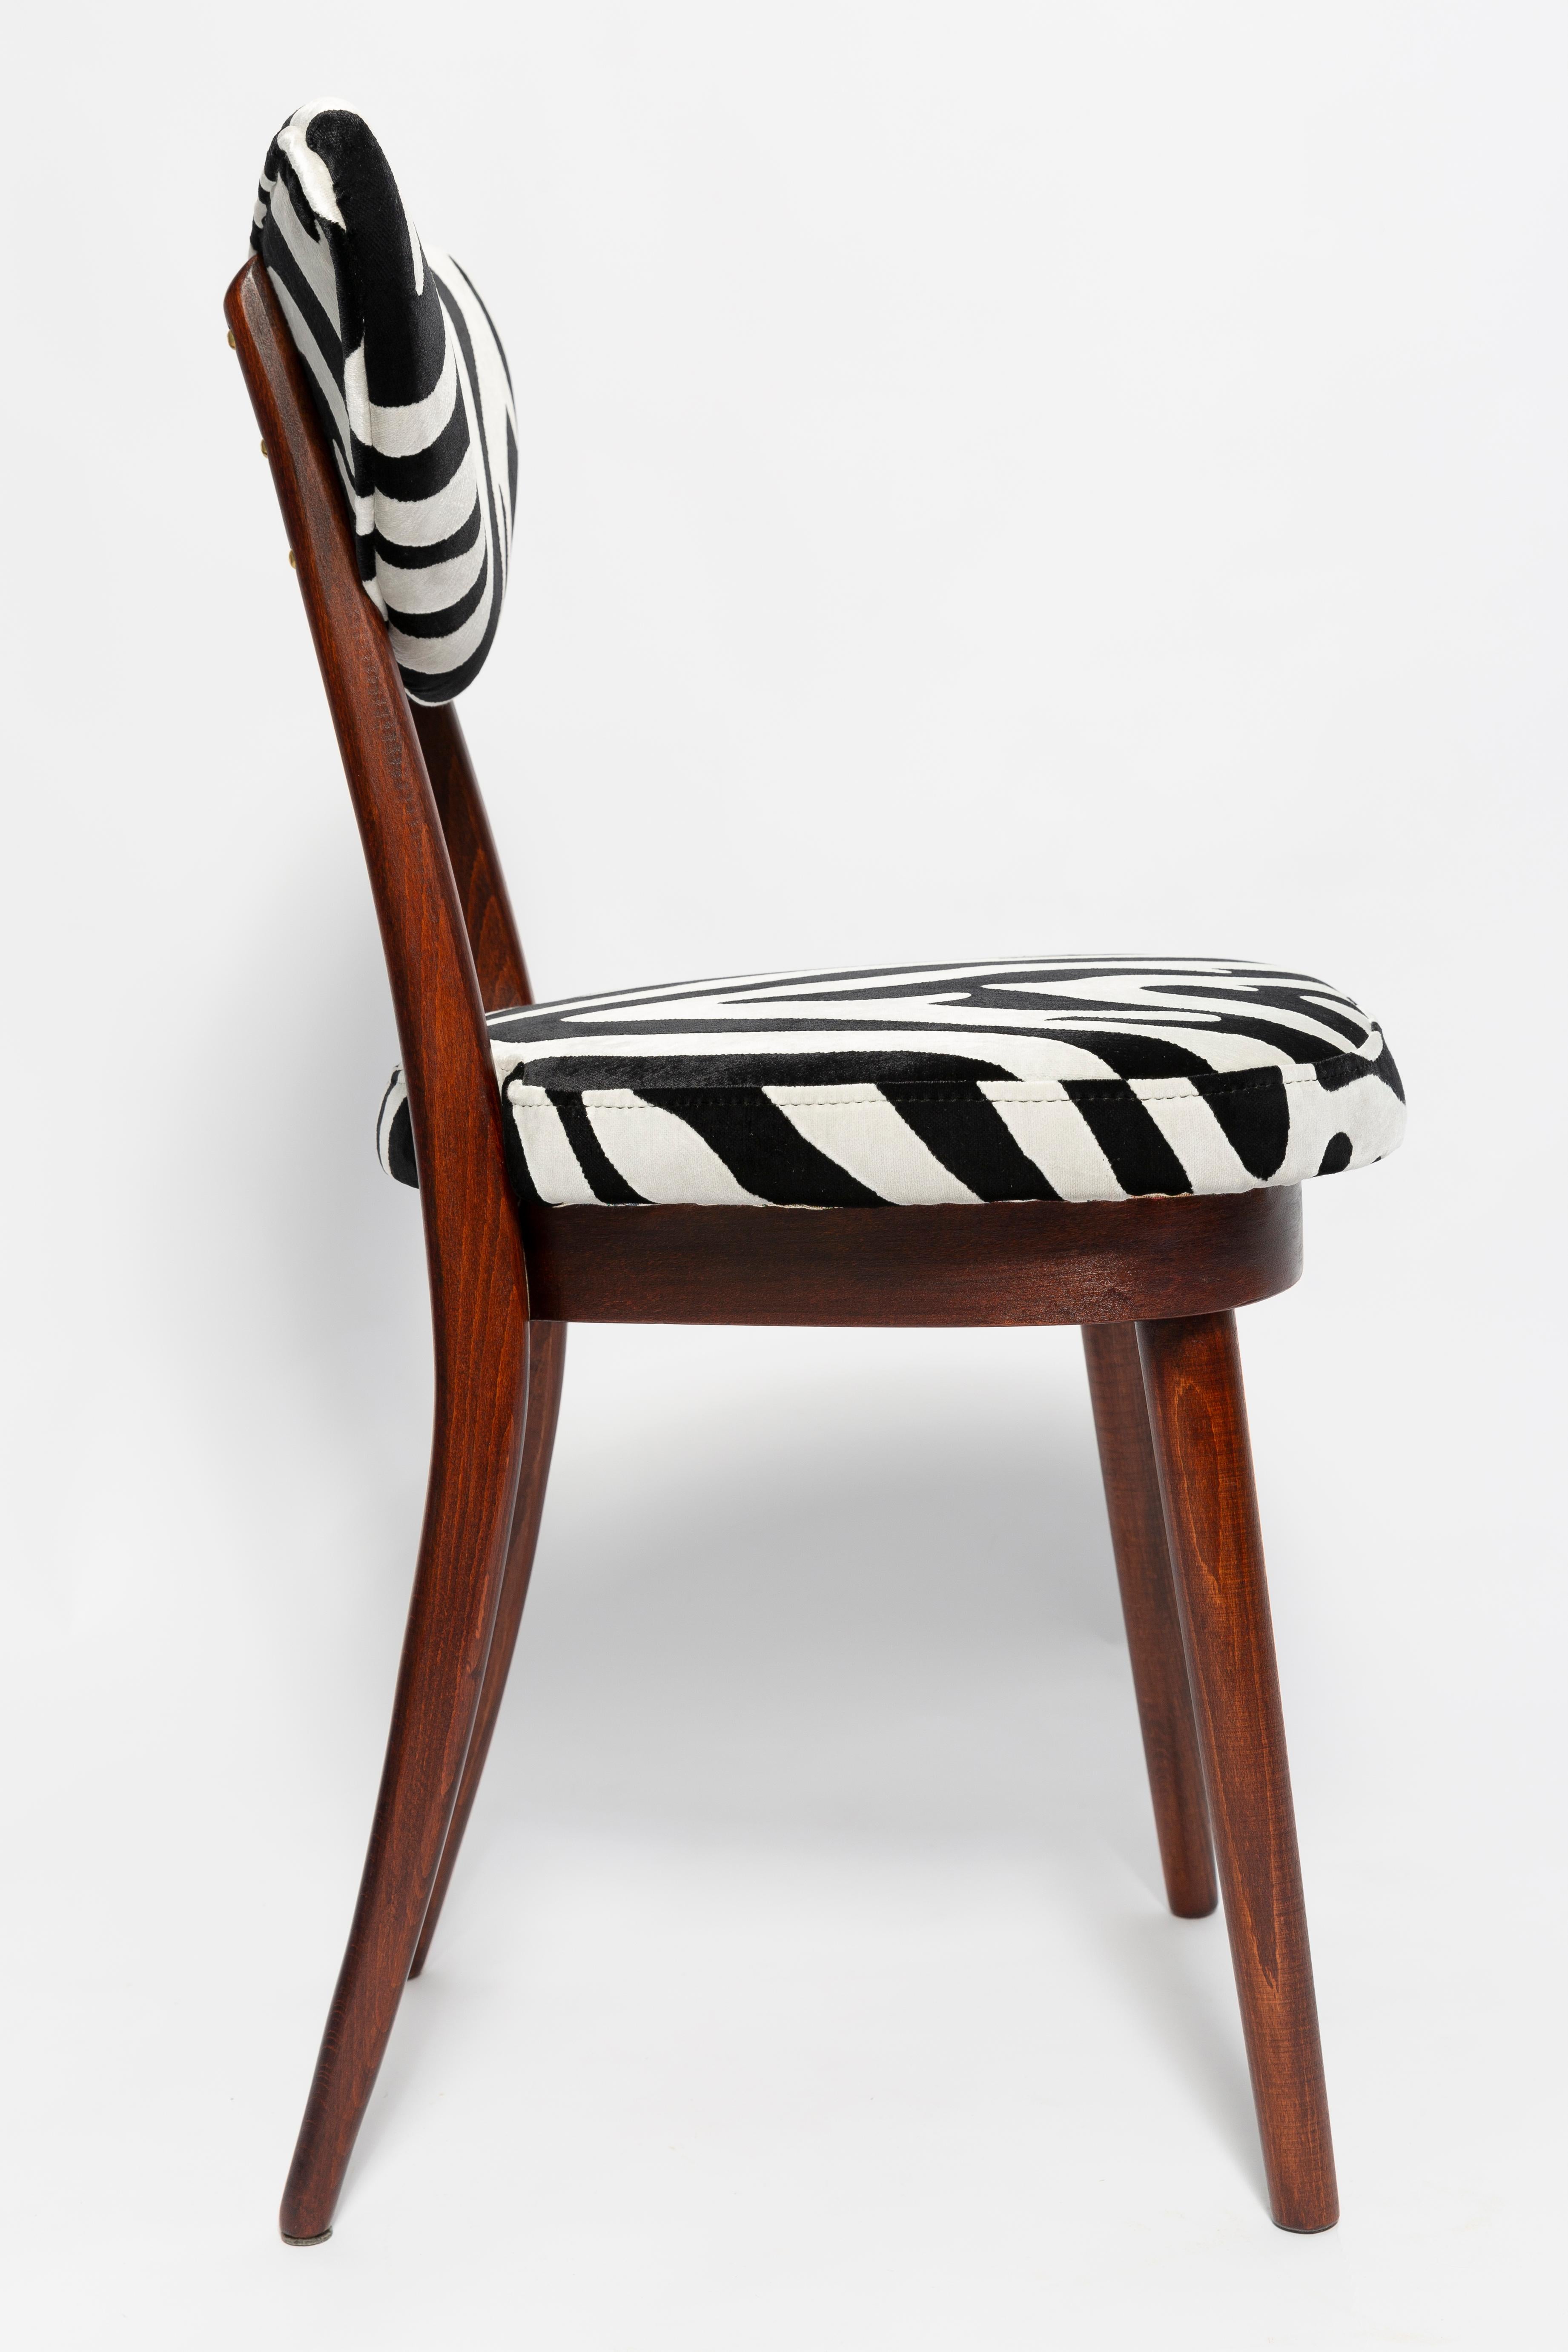 Hand-Crafted Set of Twelve Mid-Century Zebra Black and White Heart Chairs, Poland, 1960s For Sale